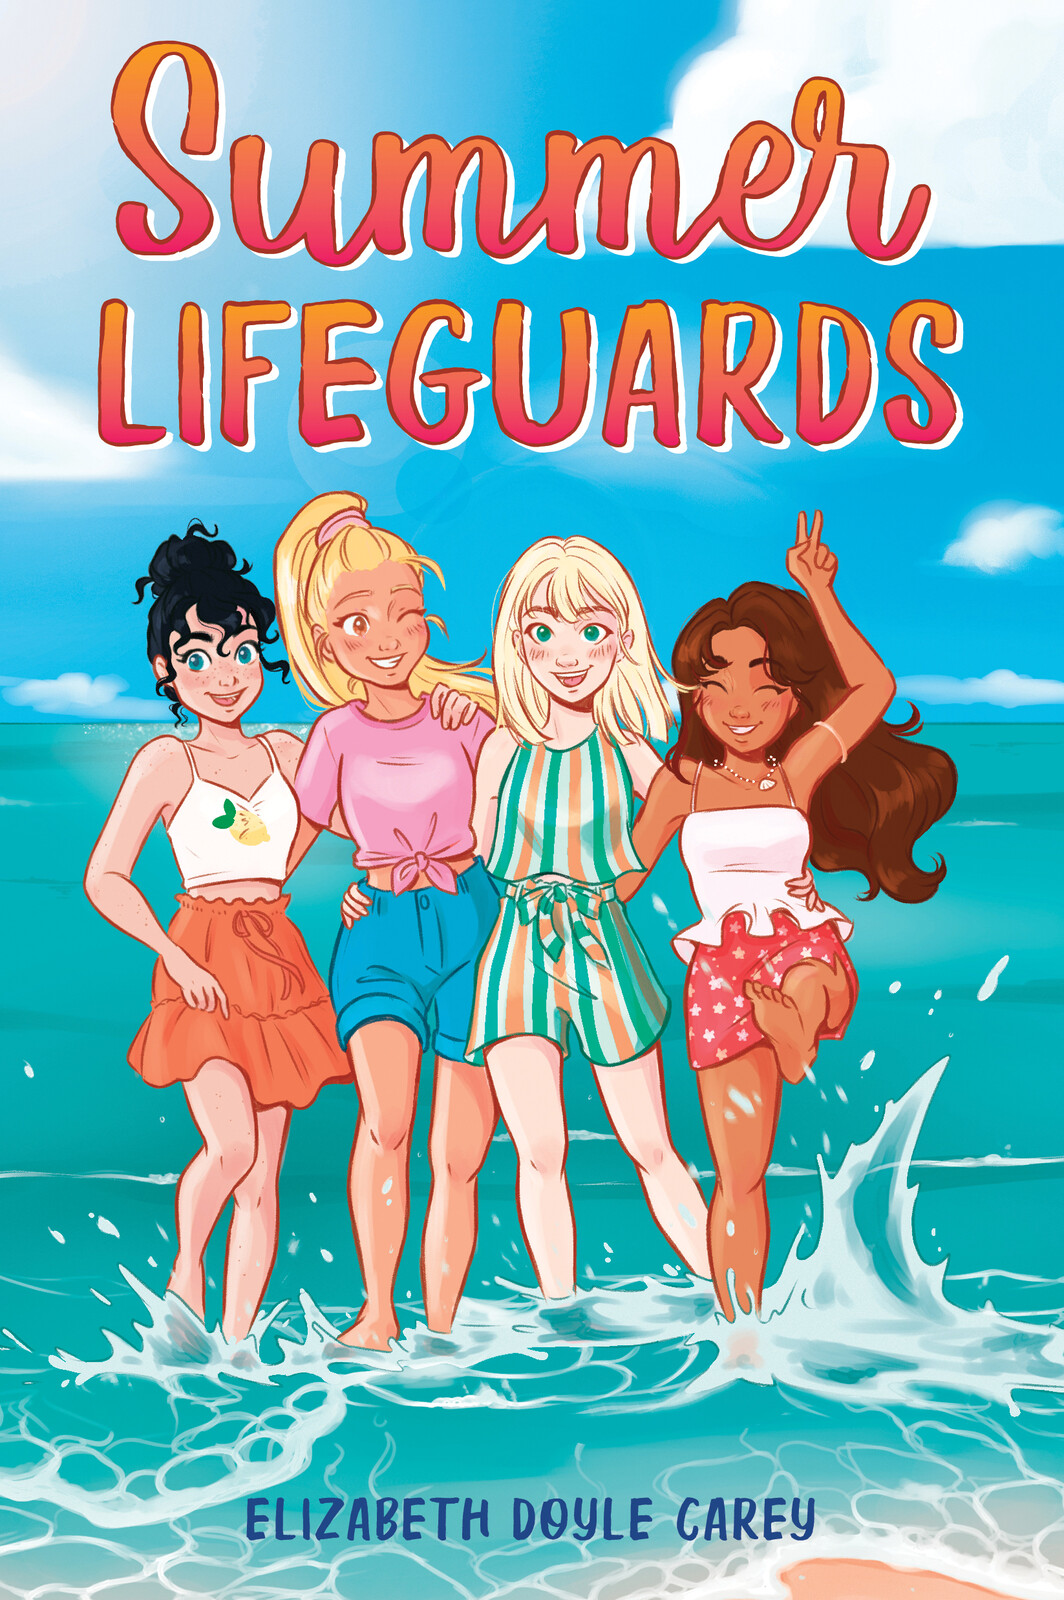 Cover for SUMMER LIFEGUARDS (2021).
Written by Elizabeth Doyle Carey.